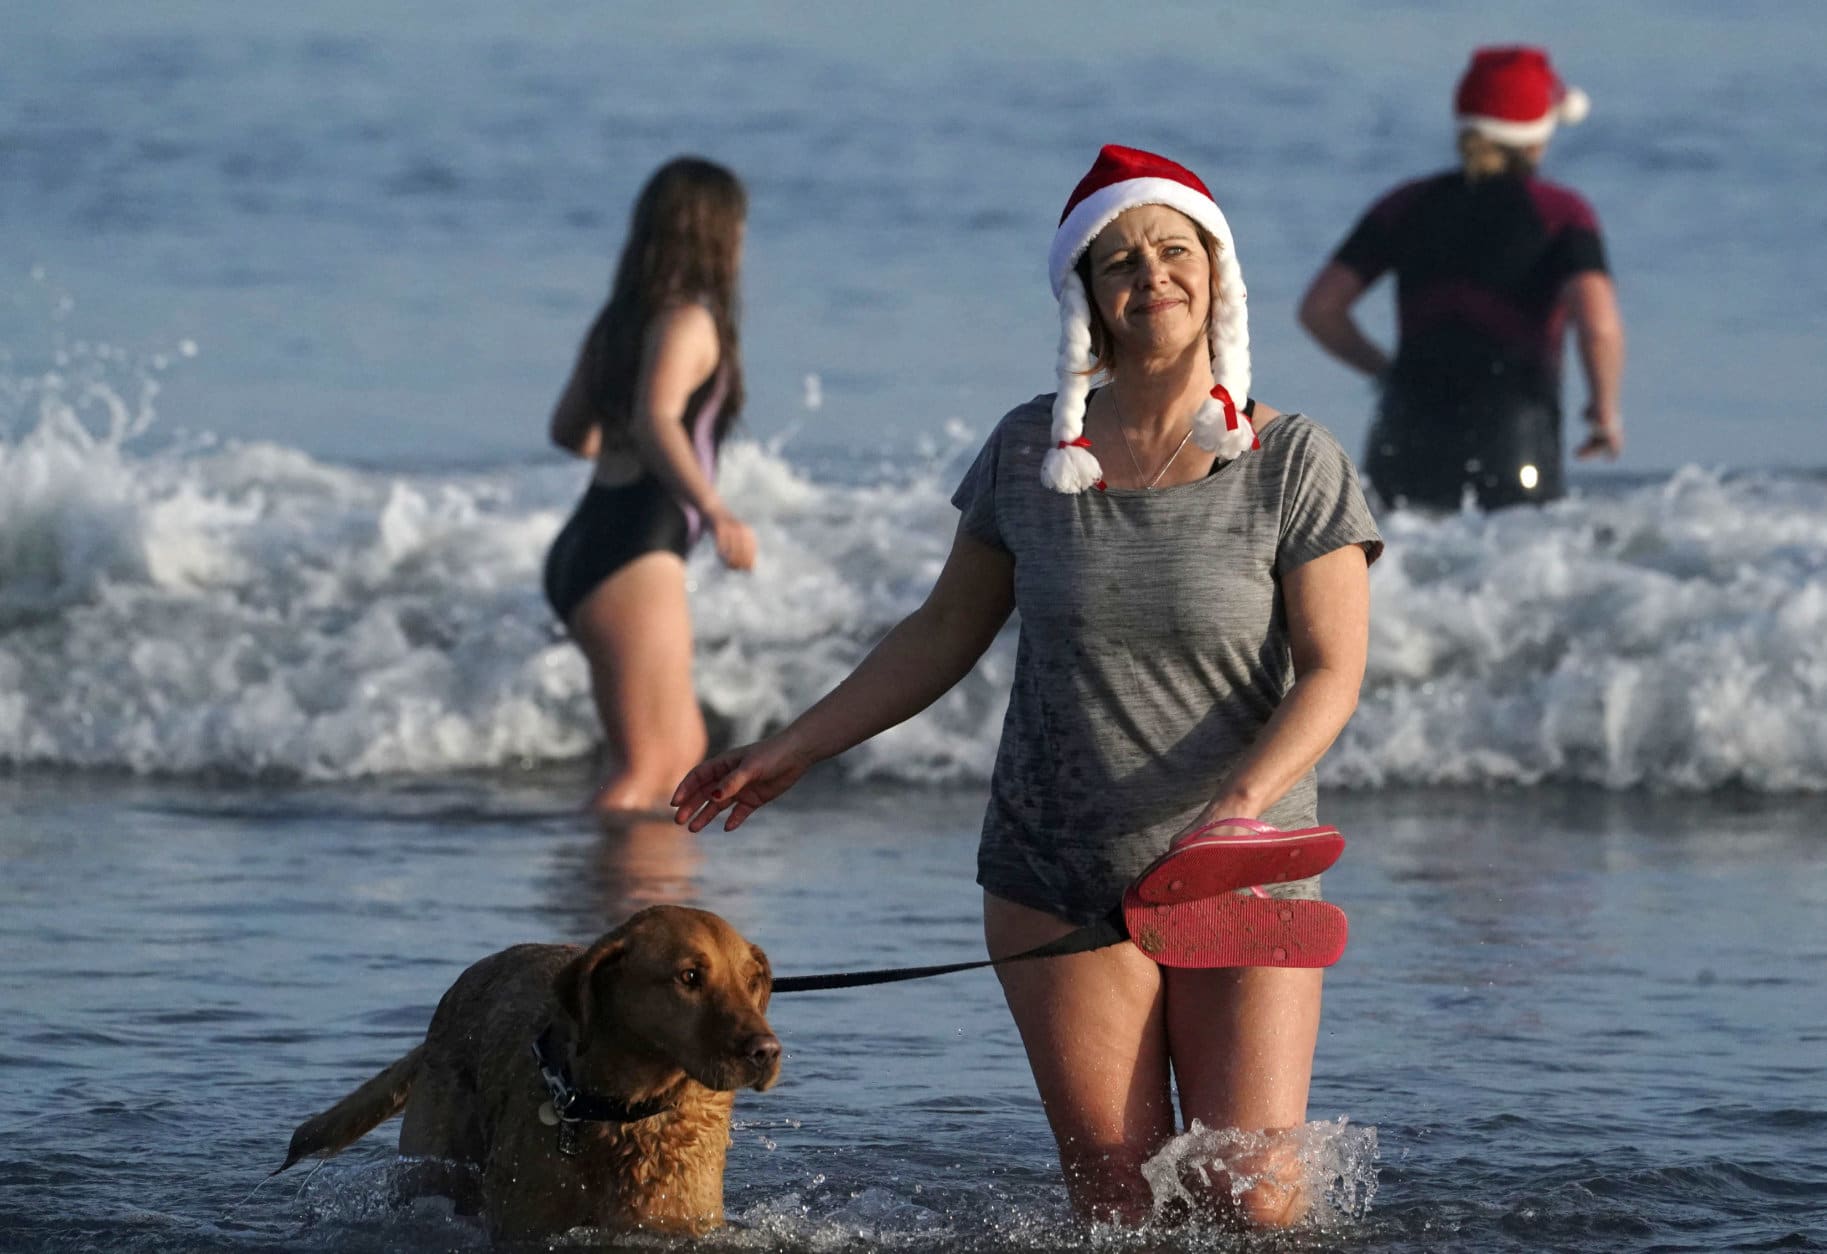 A woman and her dog take part in the traditional Boxing Day swim at Tynemouth beach in north east England, Wednesday Dec. 26, 2018. (Owen Humphreys/PA via AP)